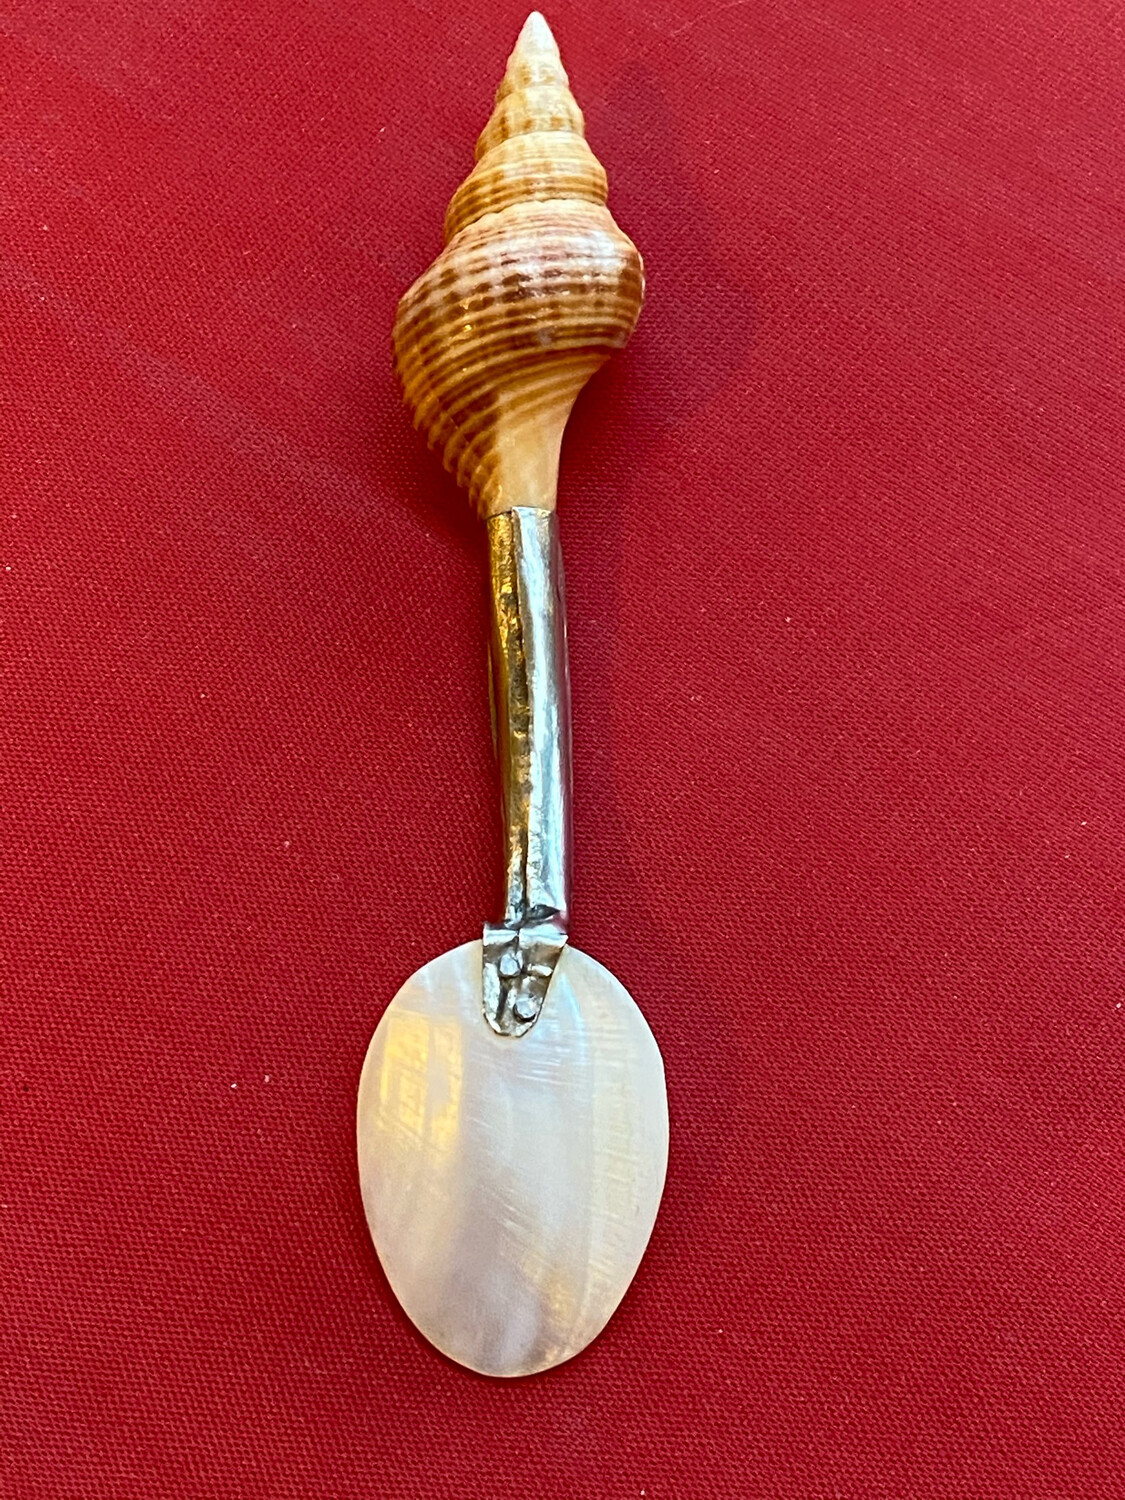 Hand Made Spoon With Shell Handle End & Mother Of Pearl Spoon